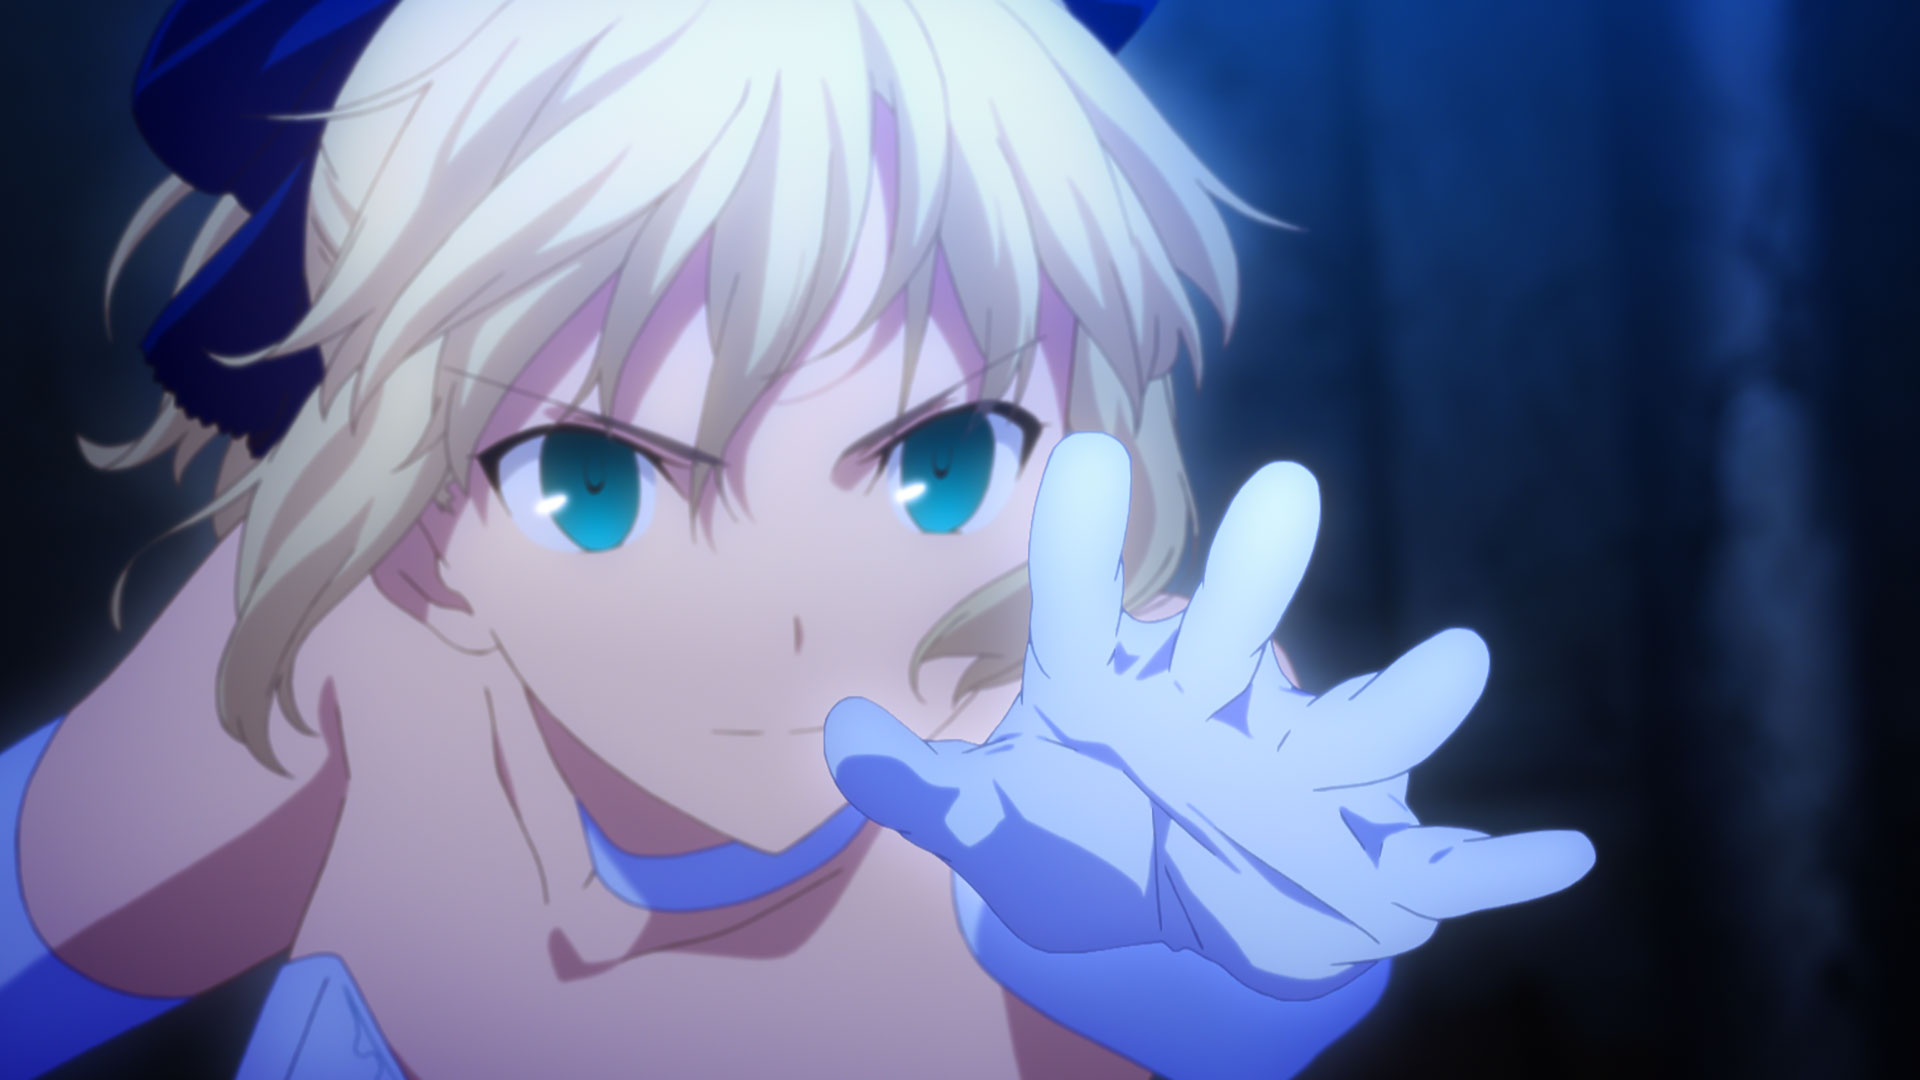 TVアニメ「Fate/stay night [Unlimited Blade Works]」2ndシーズン #18 ...